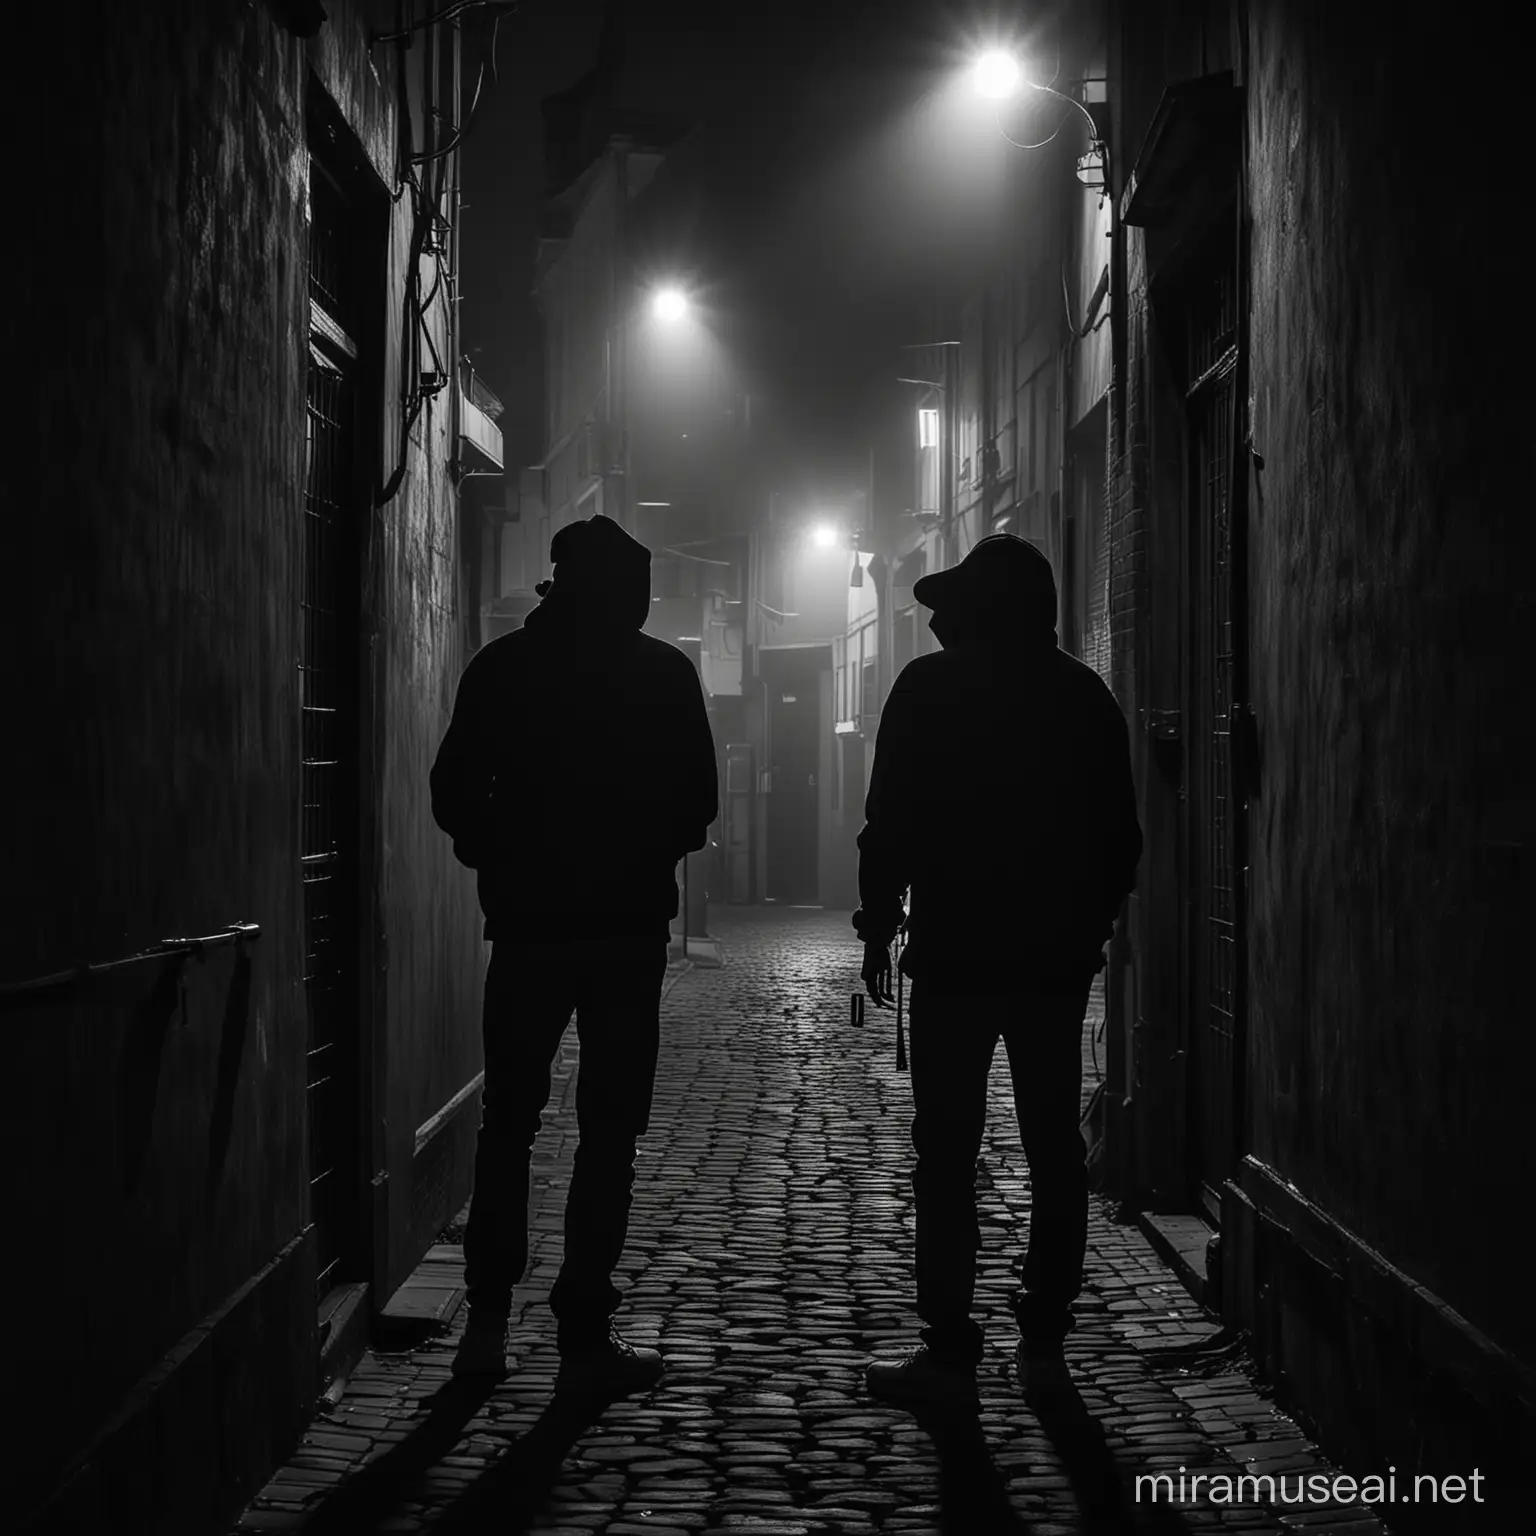 a dark ominous street in brussels at night, two male silhouettes hidden in a dark house passageway, gangster look wearing hoodies and baseball cap, one male holding a smoking a cigarette